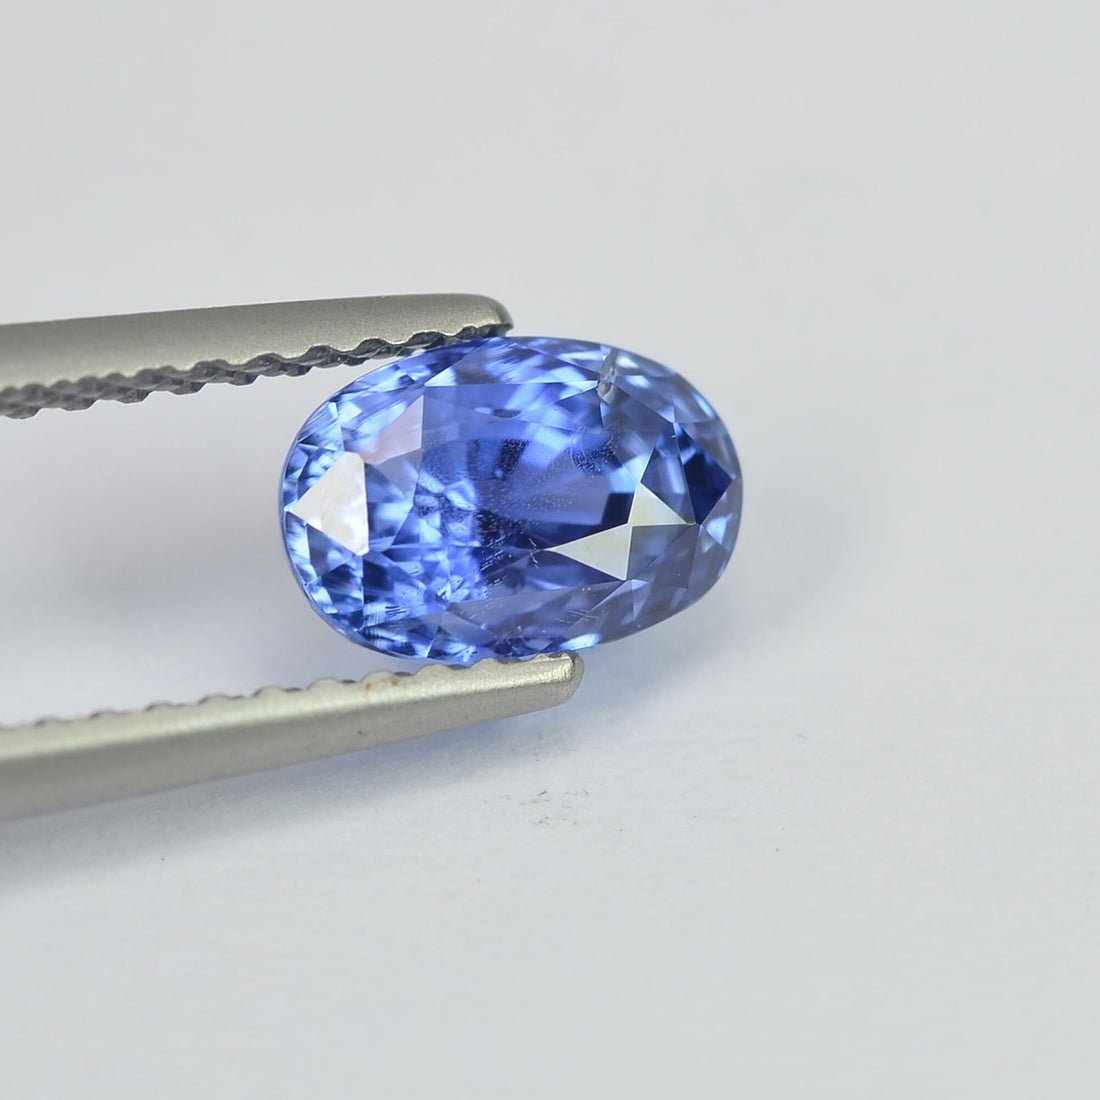 1.48 cts Unheated Natural Blue Sapphire Loose Gemstone Oval Cut Certified